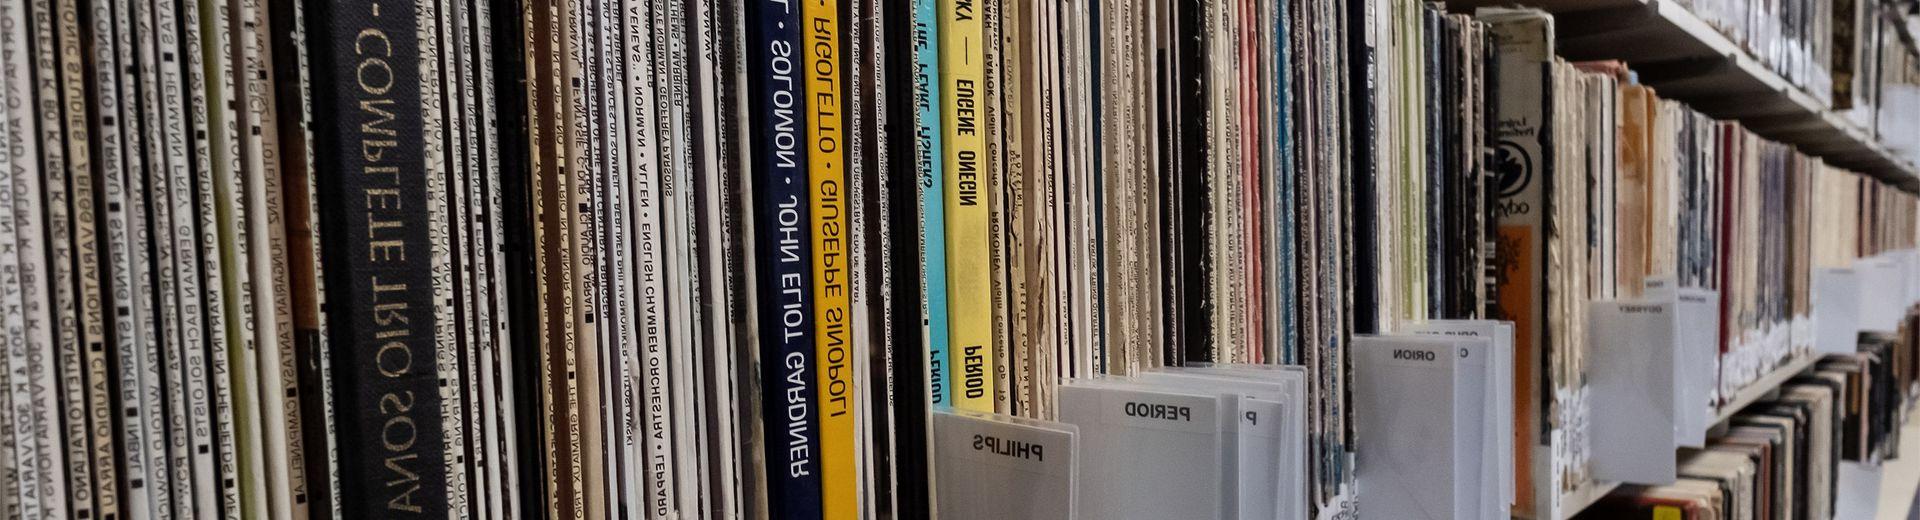 Records in the music library.